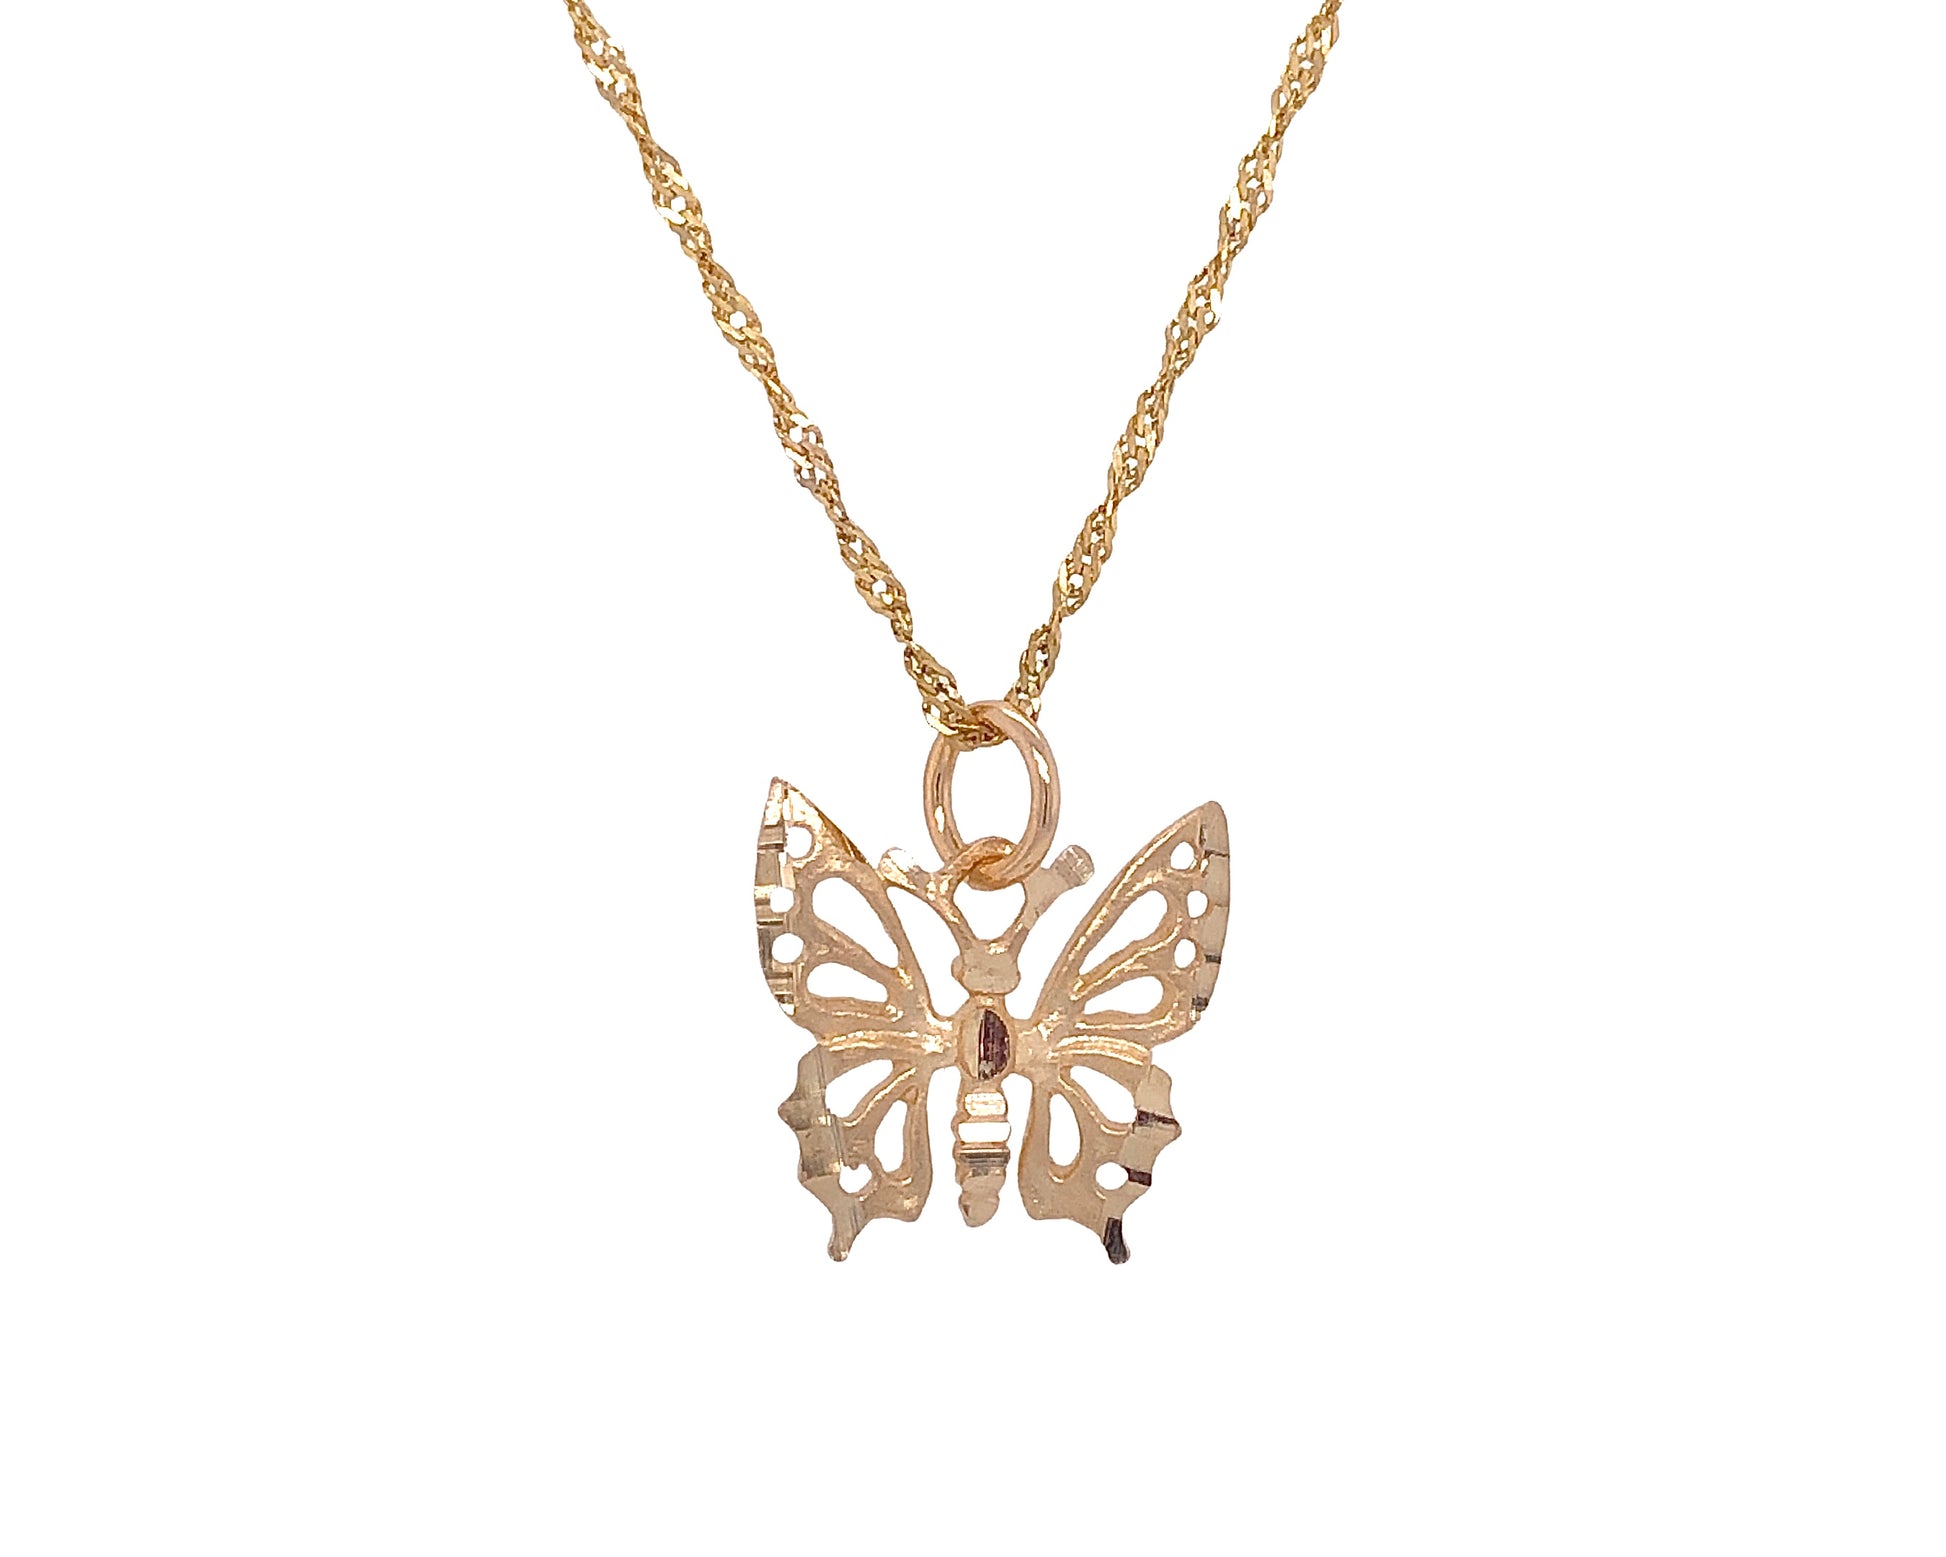 10k yellow gold butterfly necklace. Gift ideas 